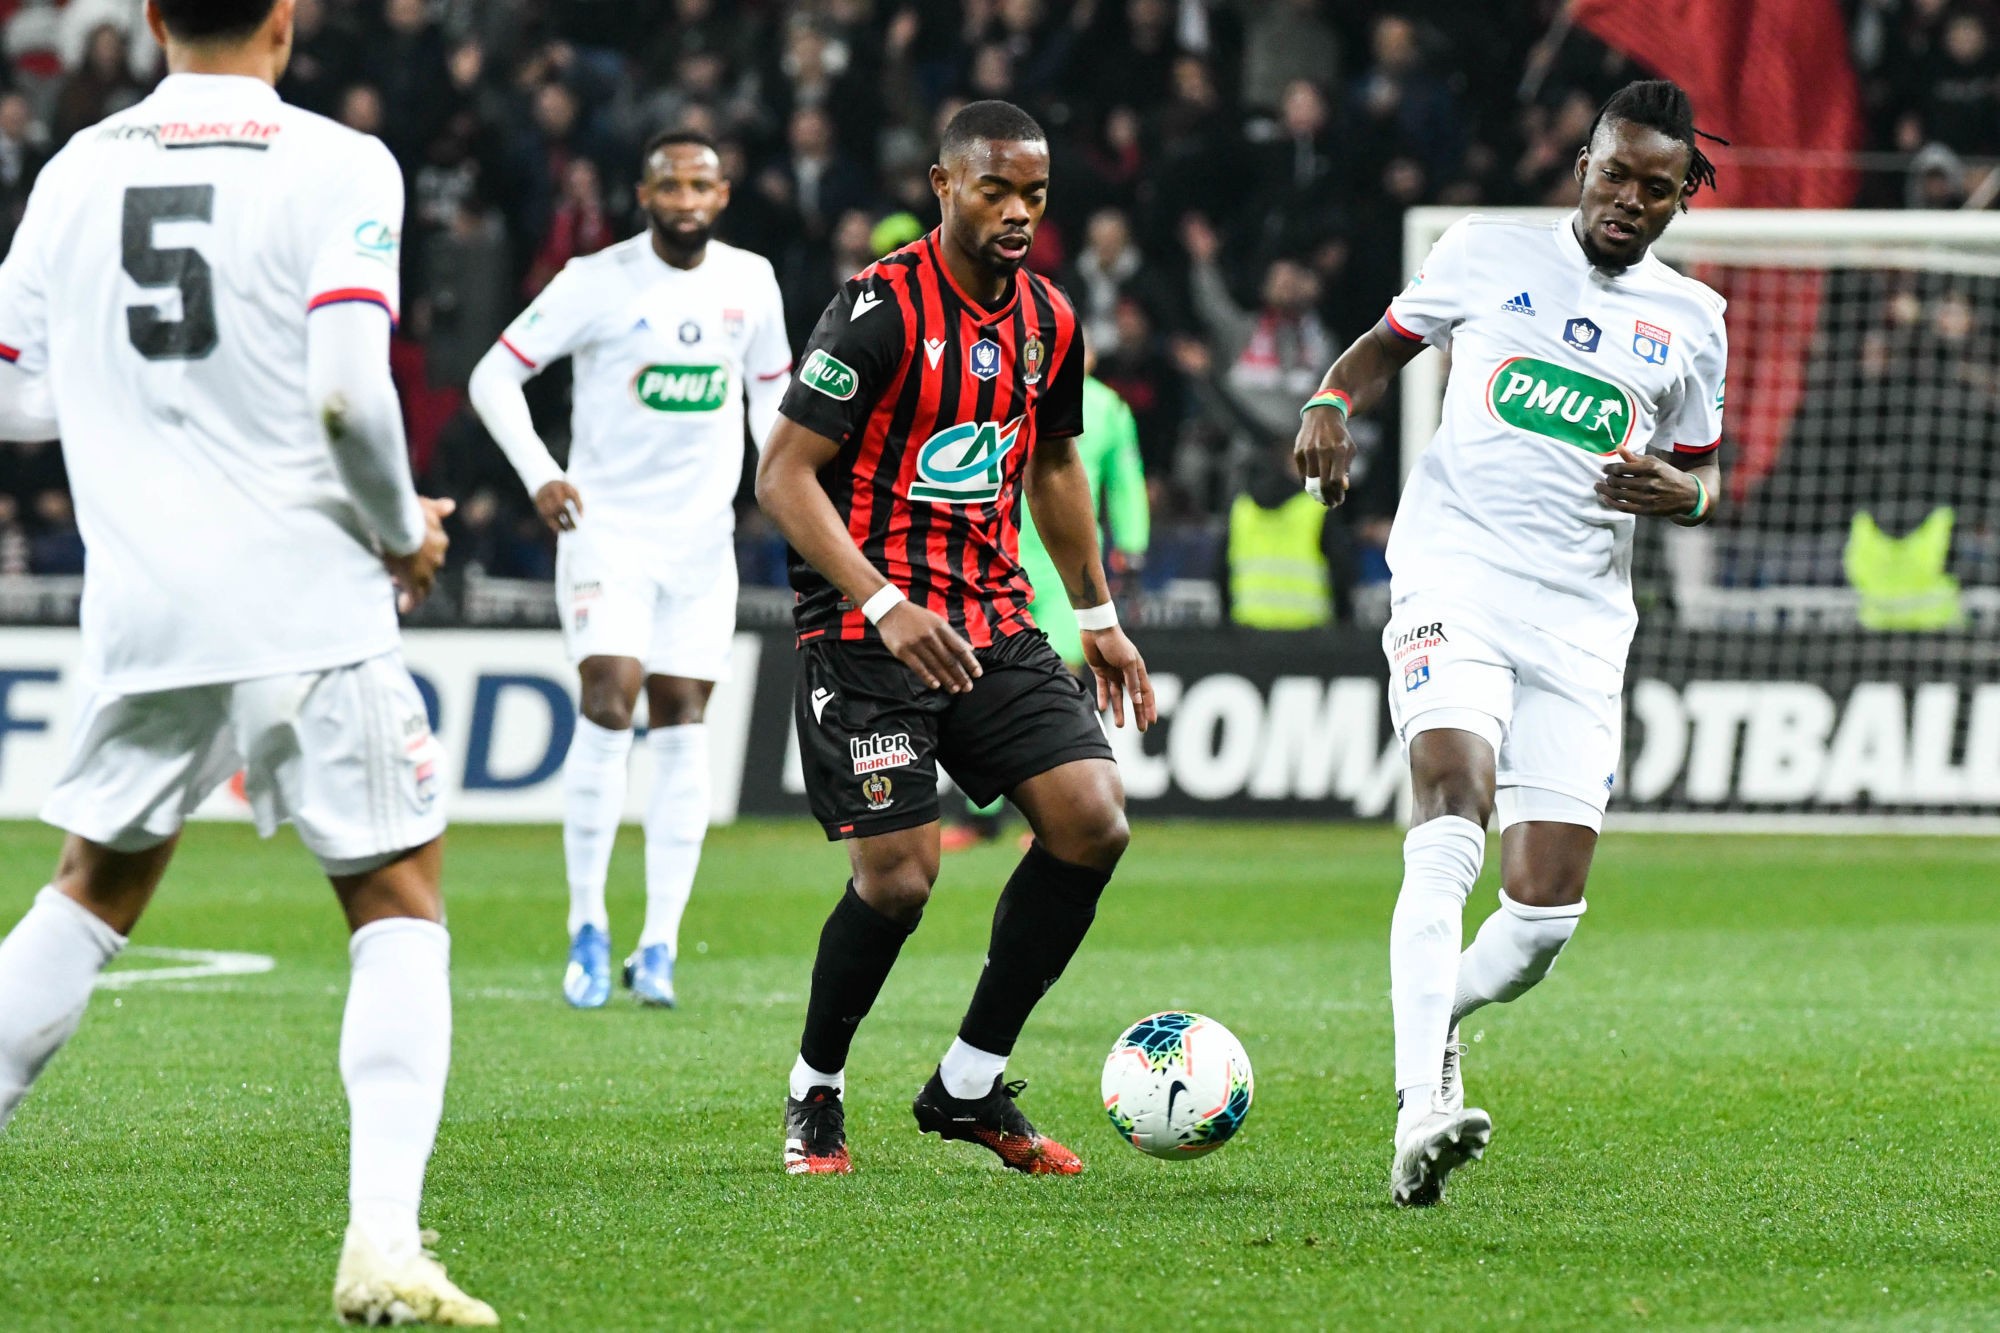 Wylan CYPRIEN of Nice during the French Cup soccer match between Nice and Lyon at Allianz Riviera on January 30, 2020 in Nice, France. (Photo by Pascal Della Zuana/Icon Sport) - Bertrand TRAORE - Wylan CYPRIEN - Allianz Riviera - Nice (France)